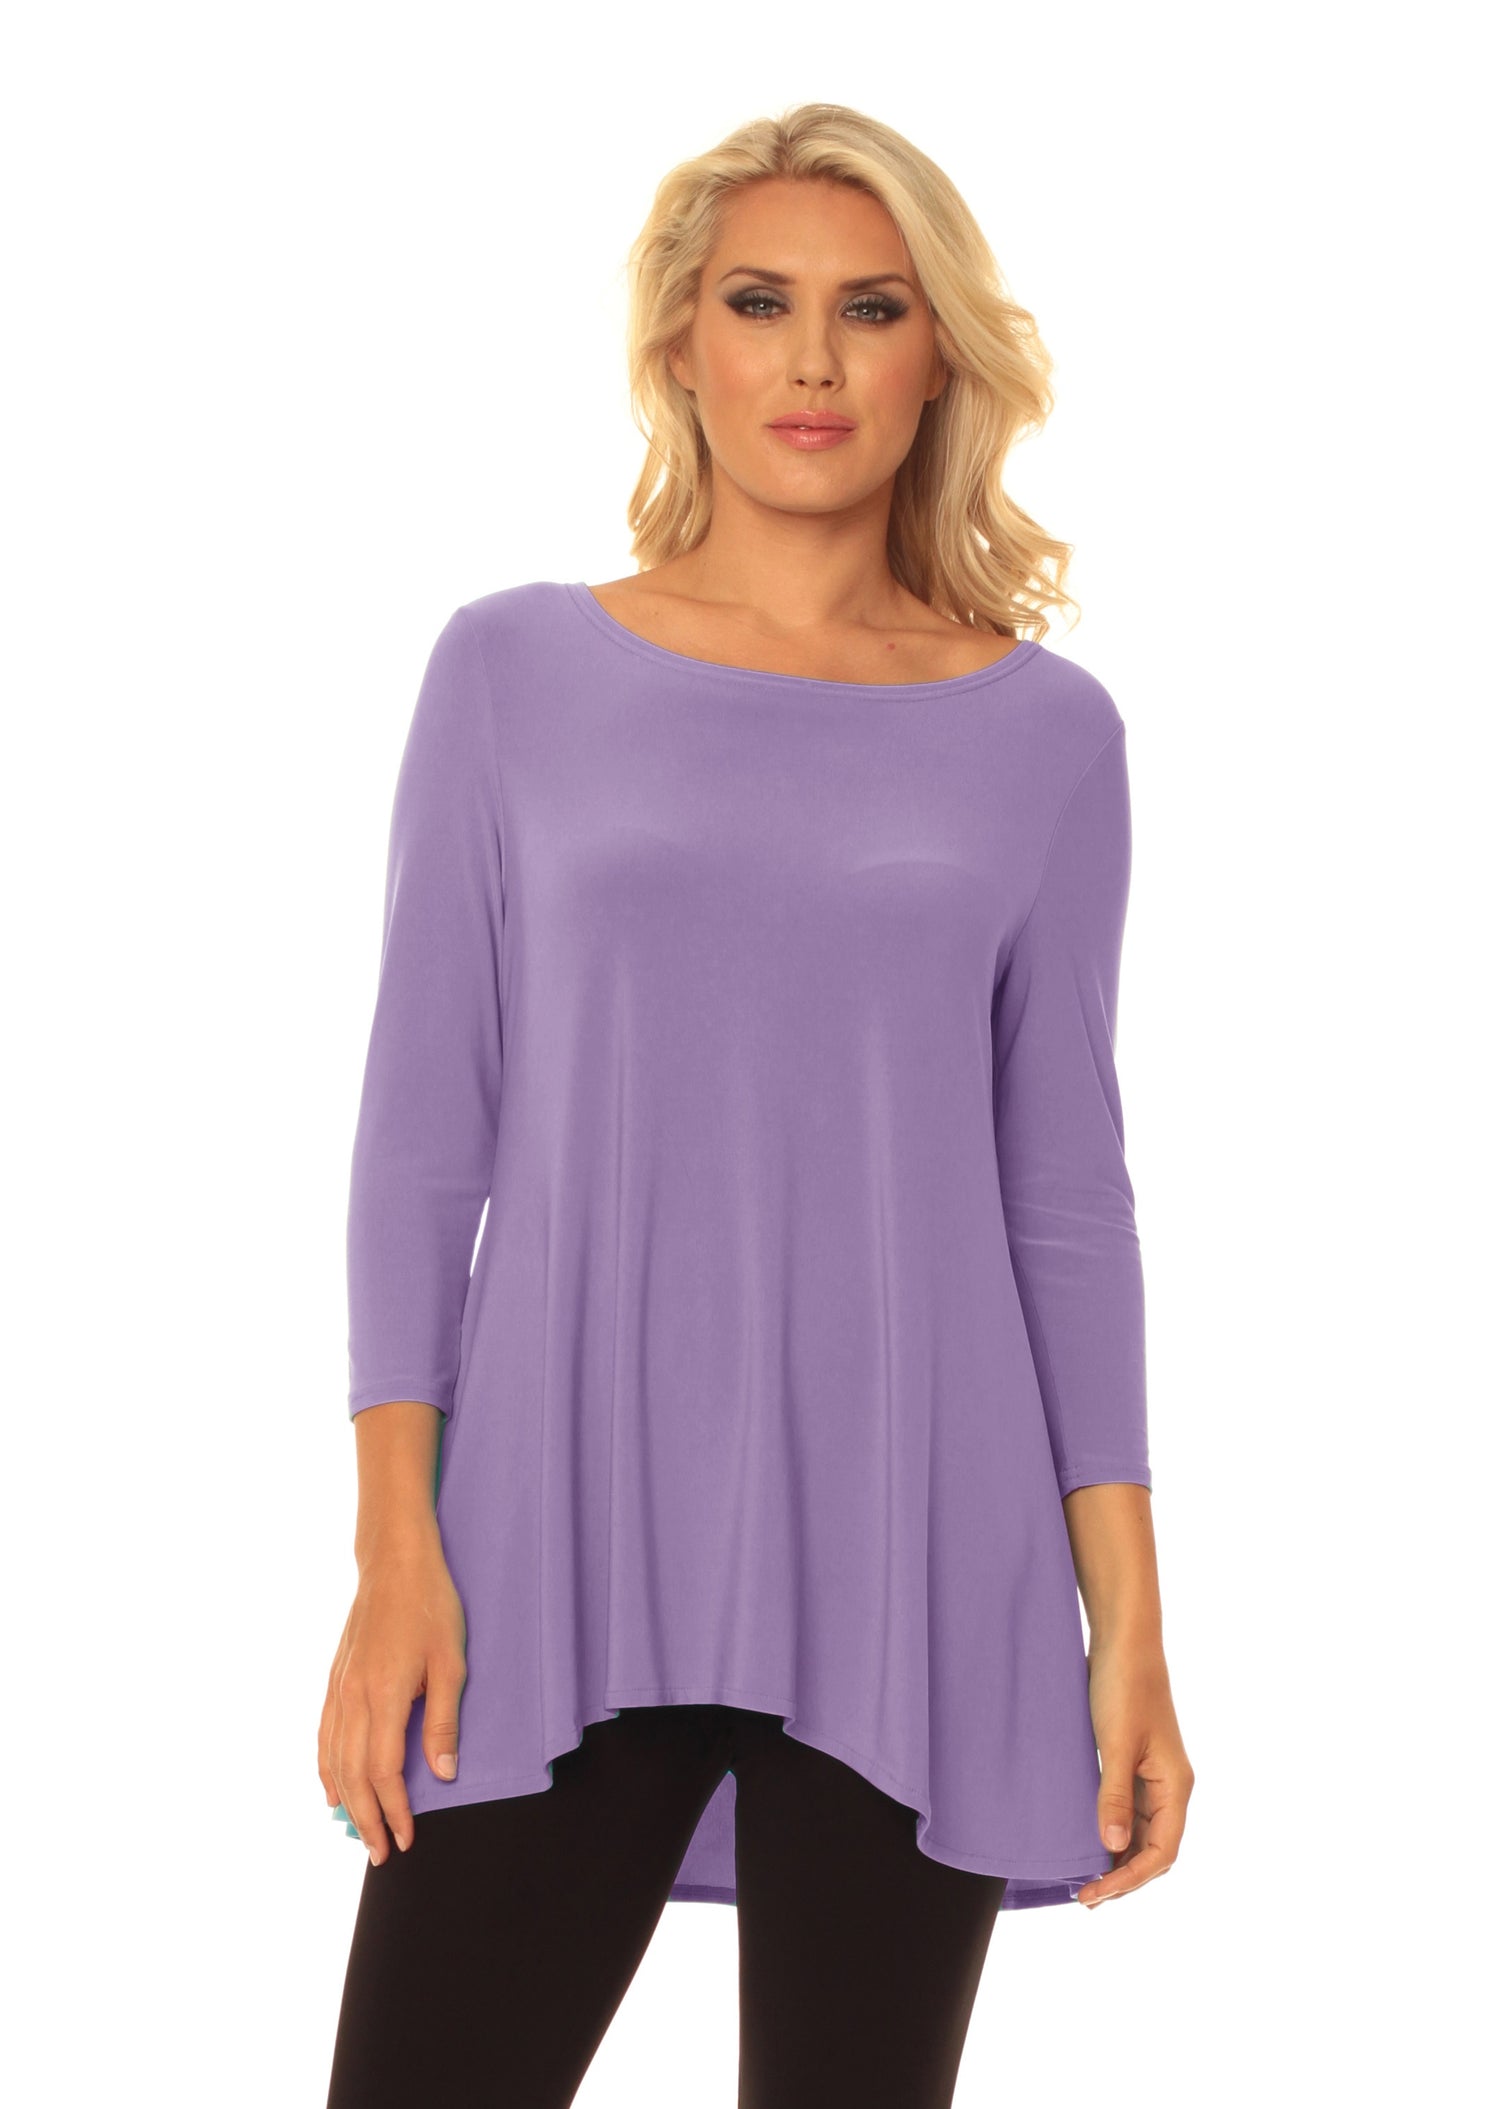 Women's High Low Tunic For Leggings - Bright Colors